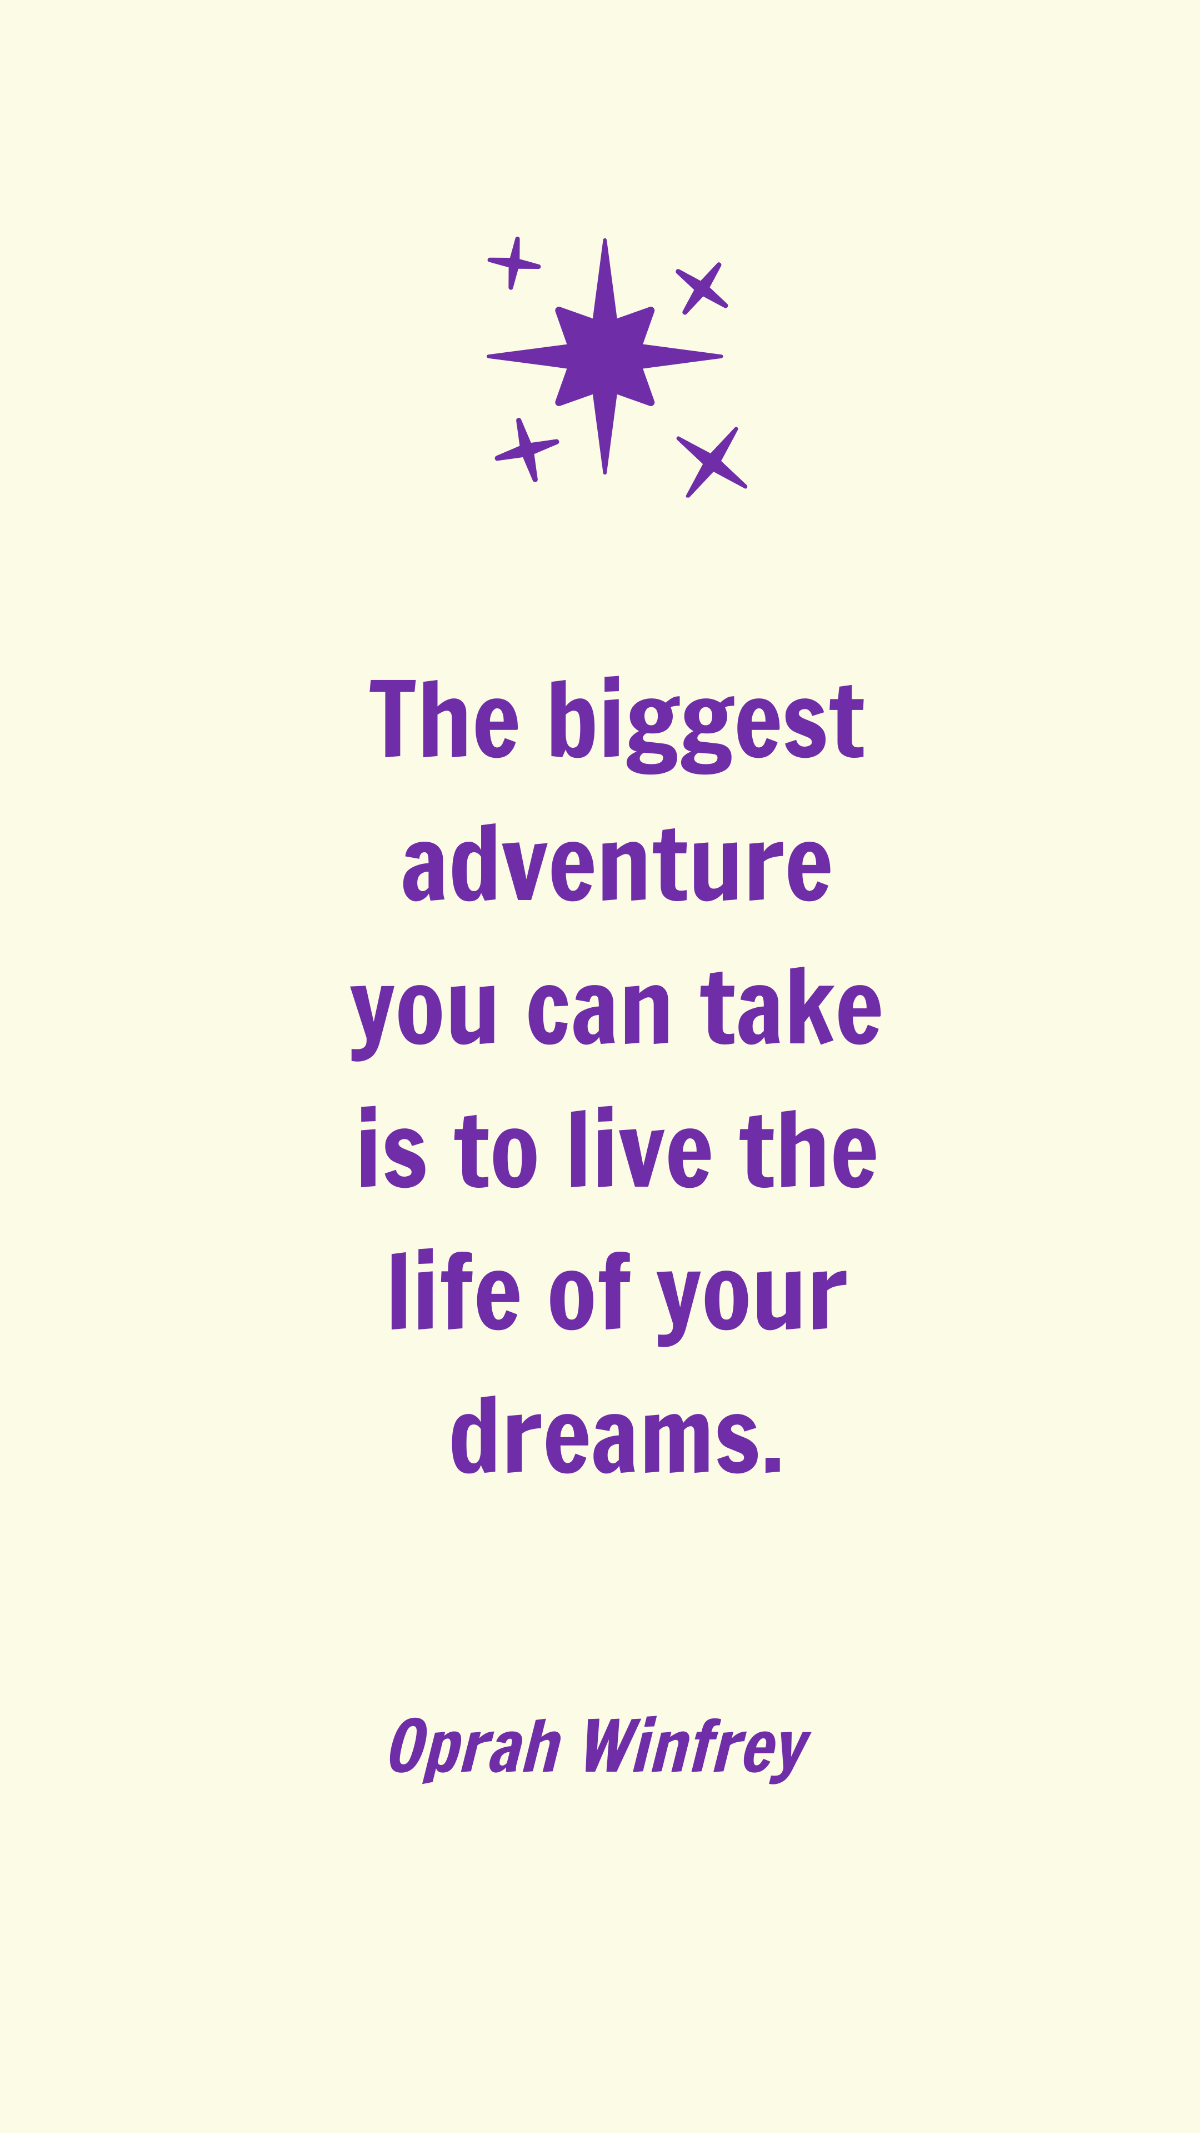 Oprah Winfrey - The biggest adventure you can take is to live the life of your dreams. Template